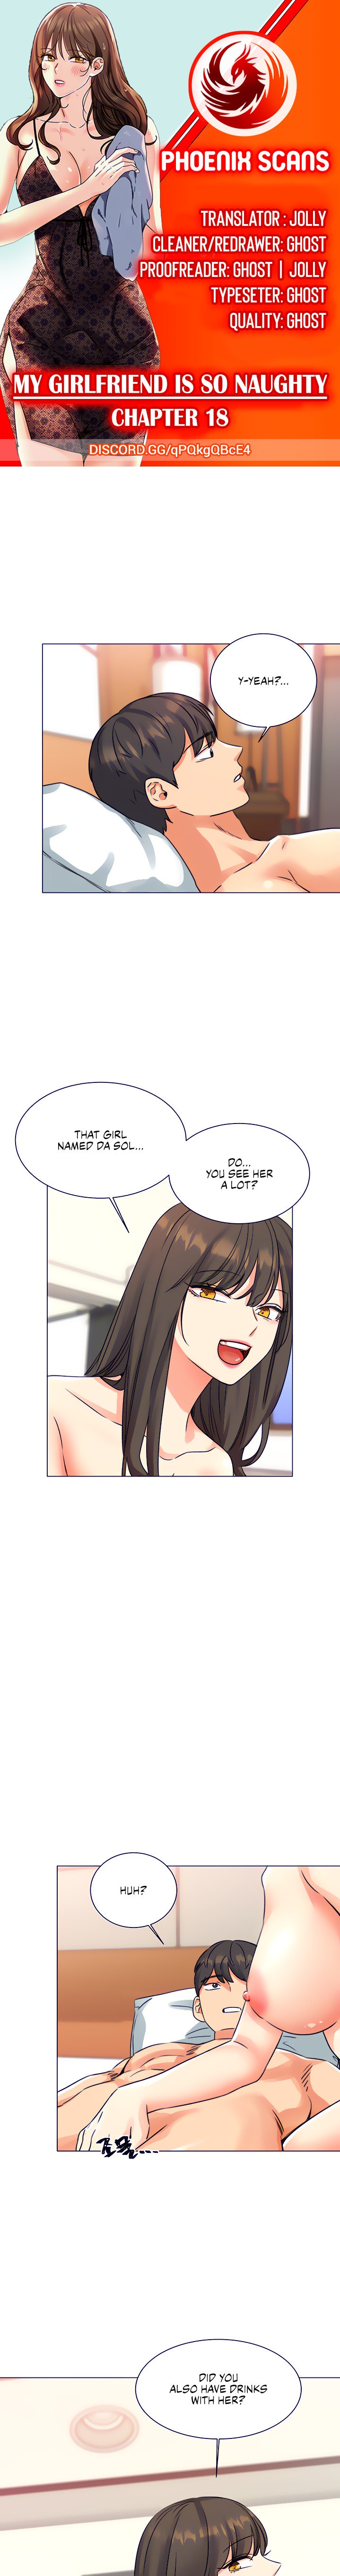 My girlfriend is so naughty - Chapter 18 Page 1